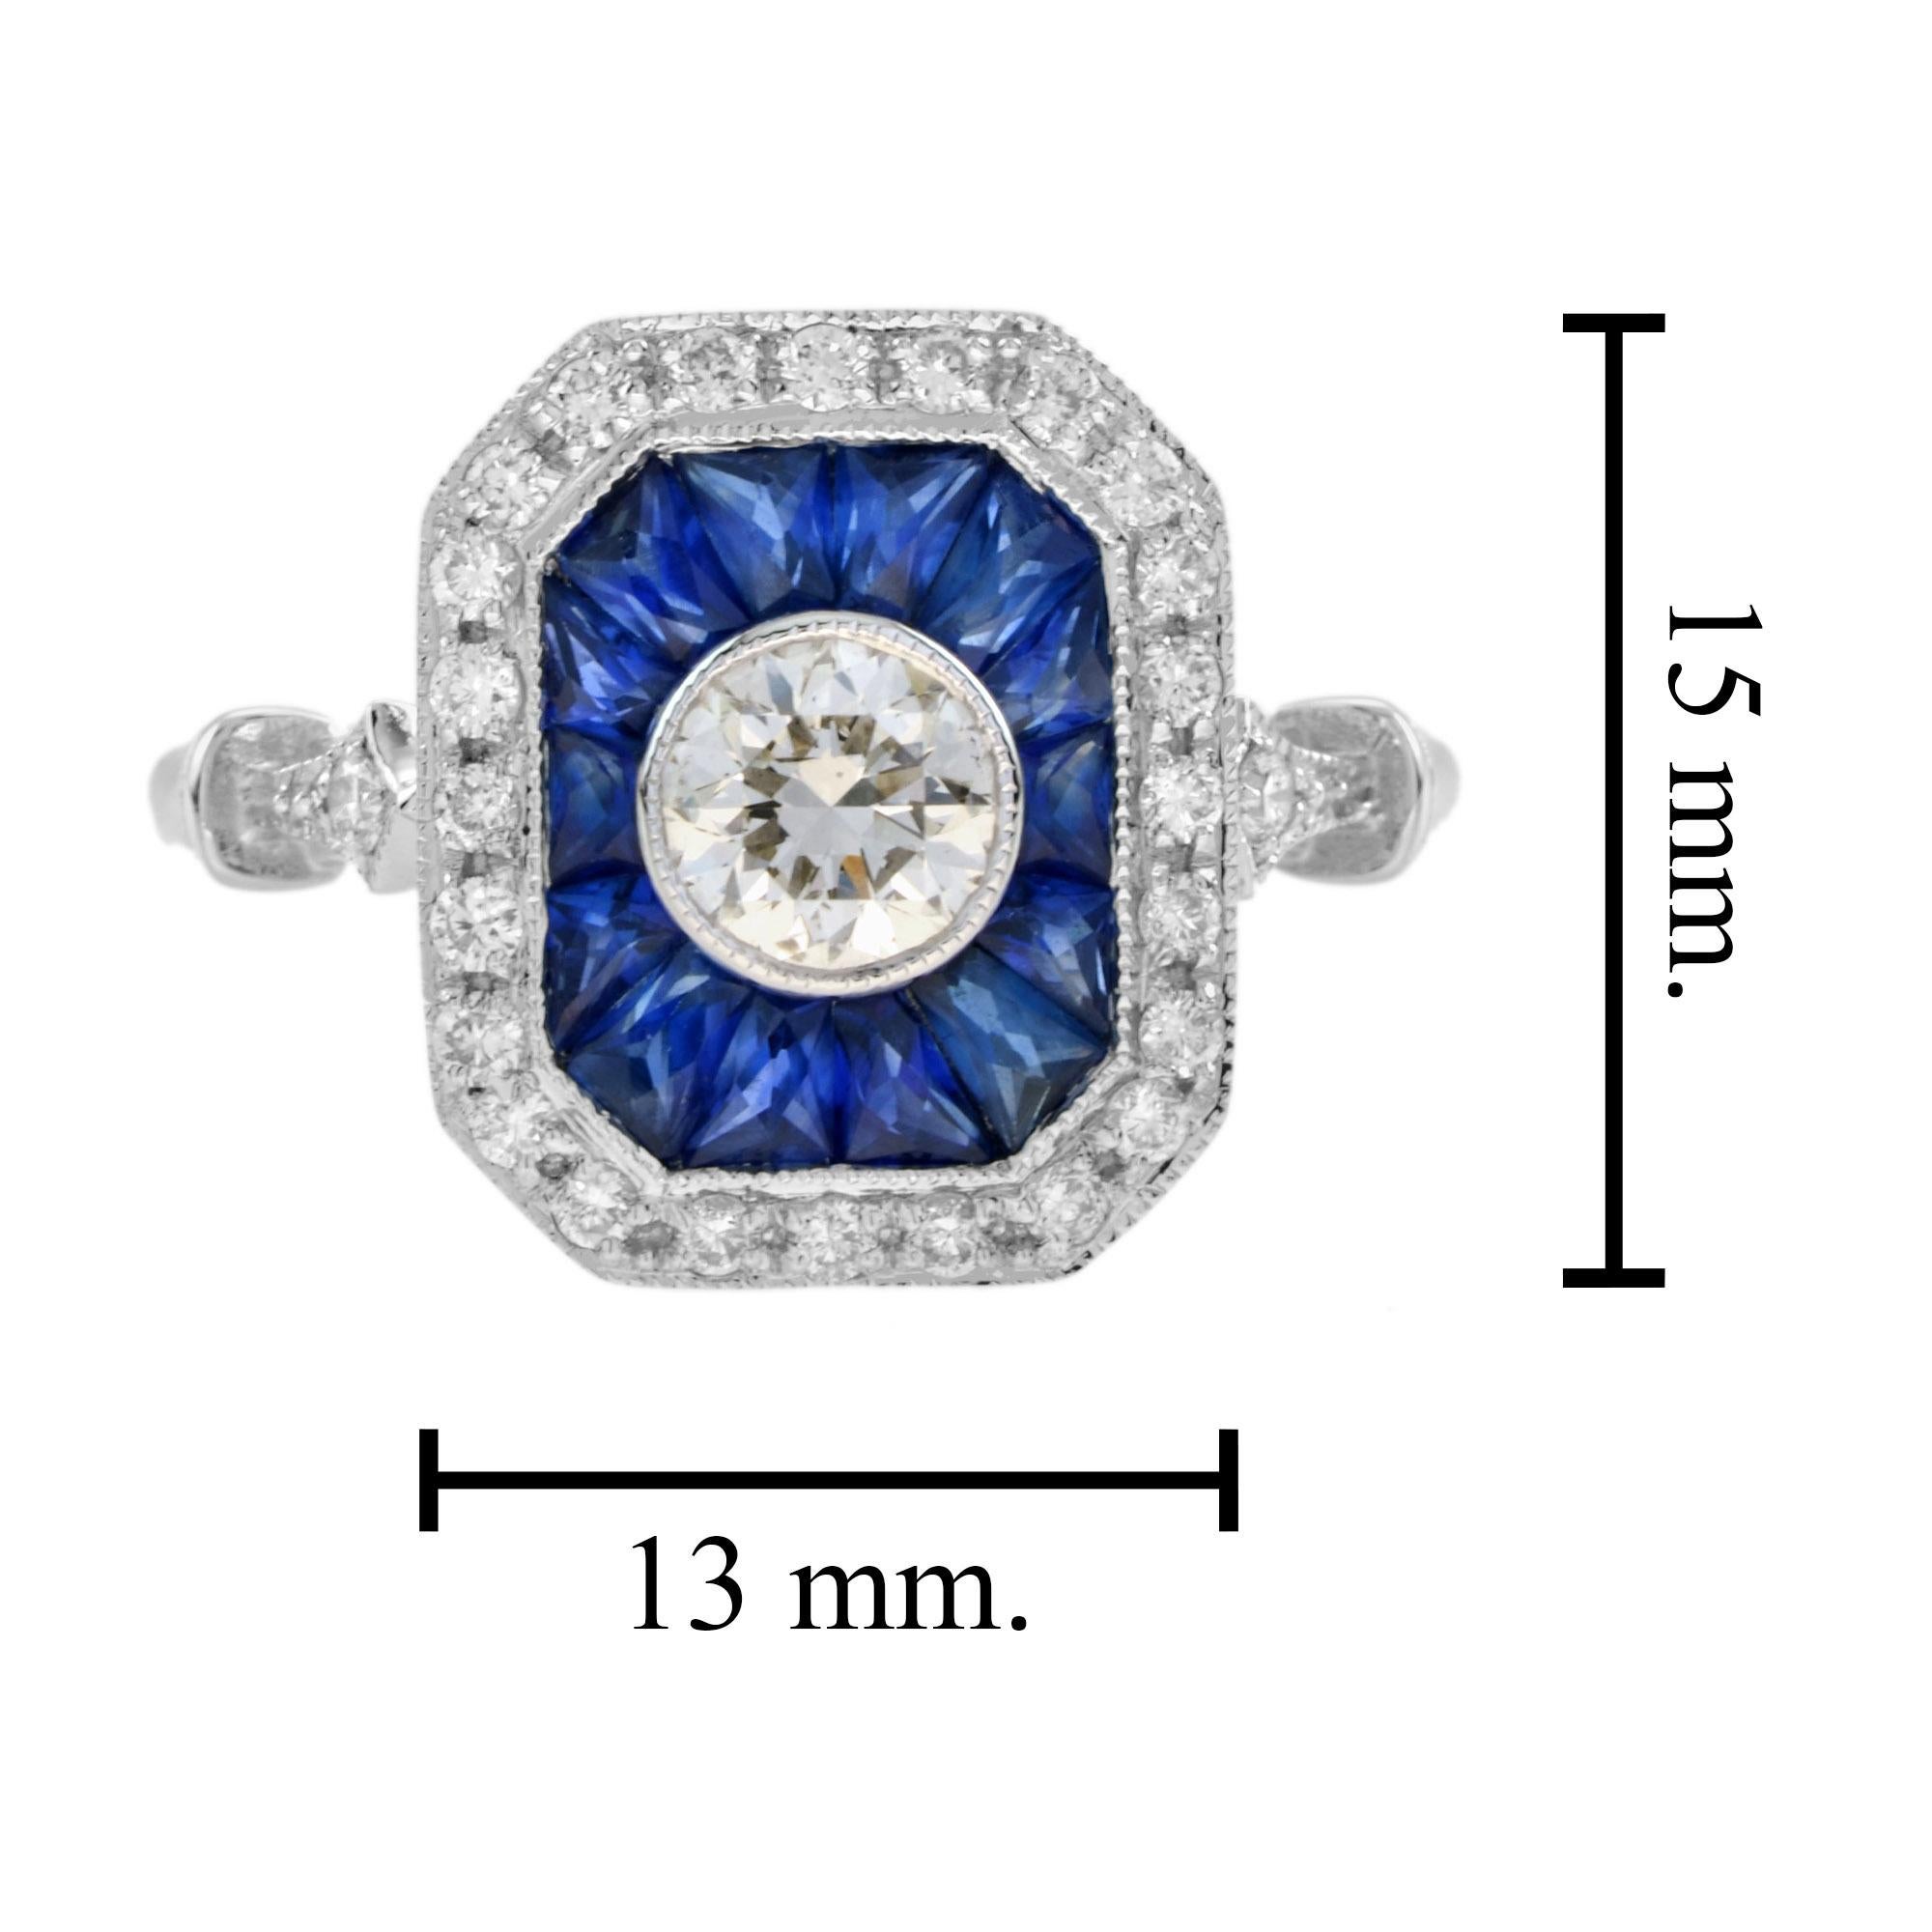 For Sale:  Diamond and Sapphire Art Deco Style Engagement Ring in 18k White Gold 8